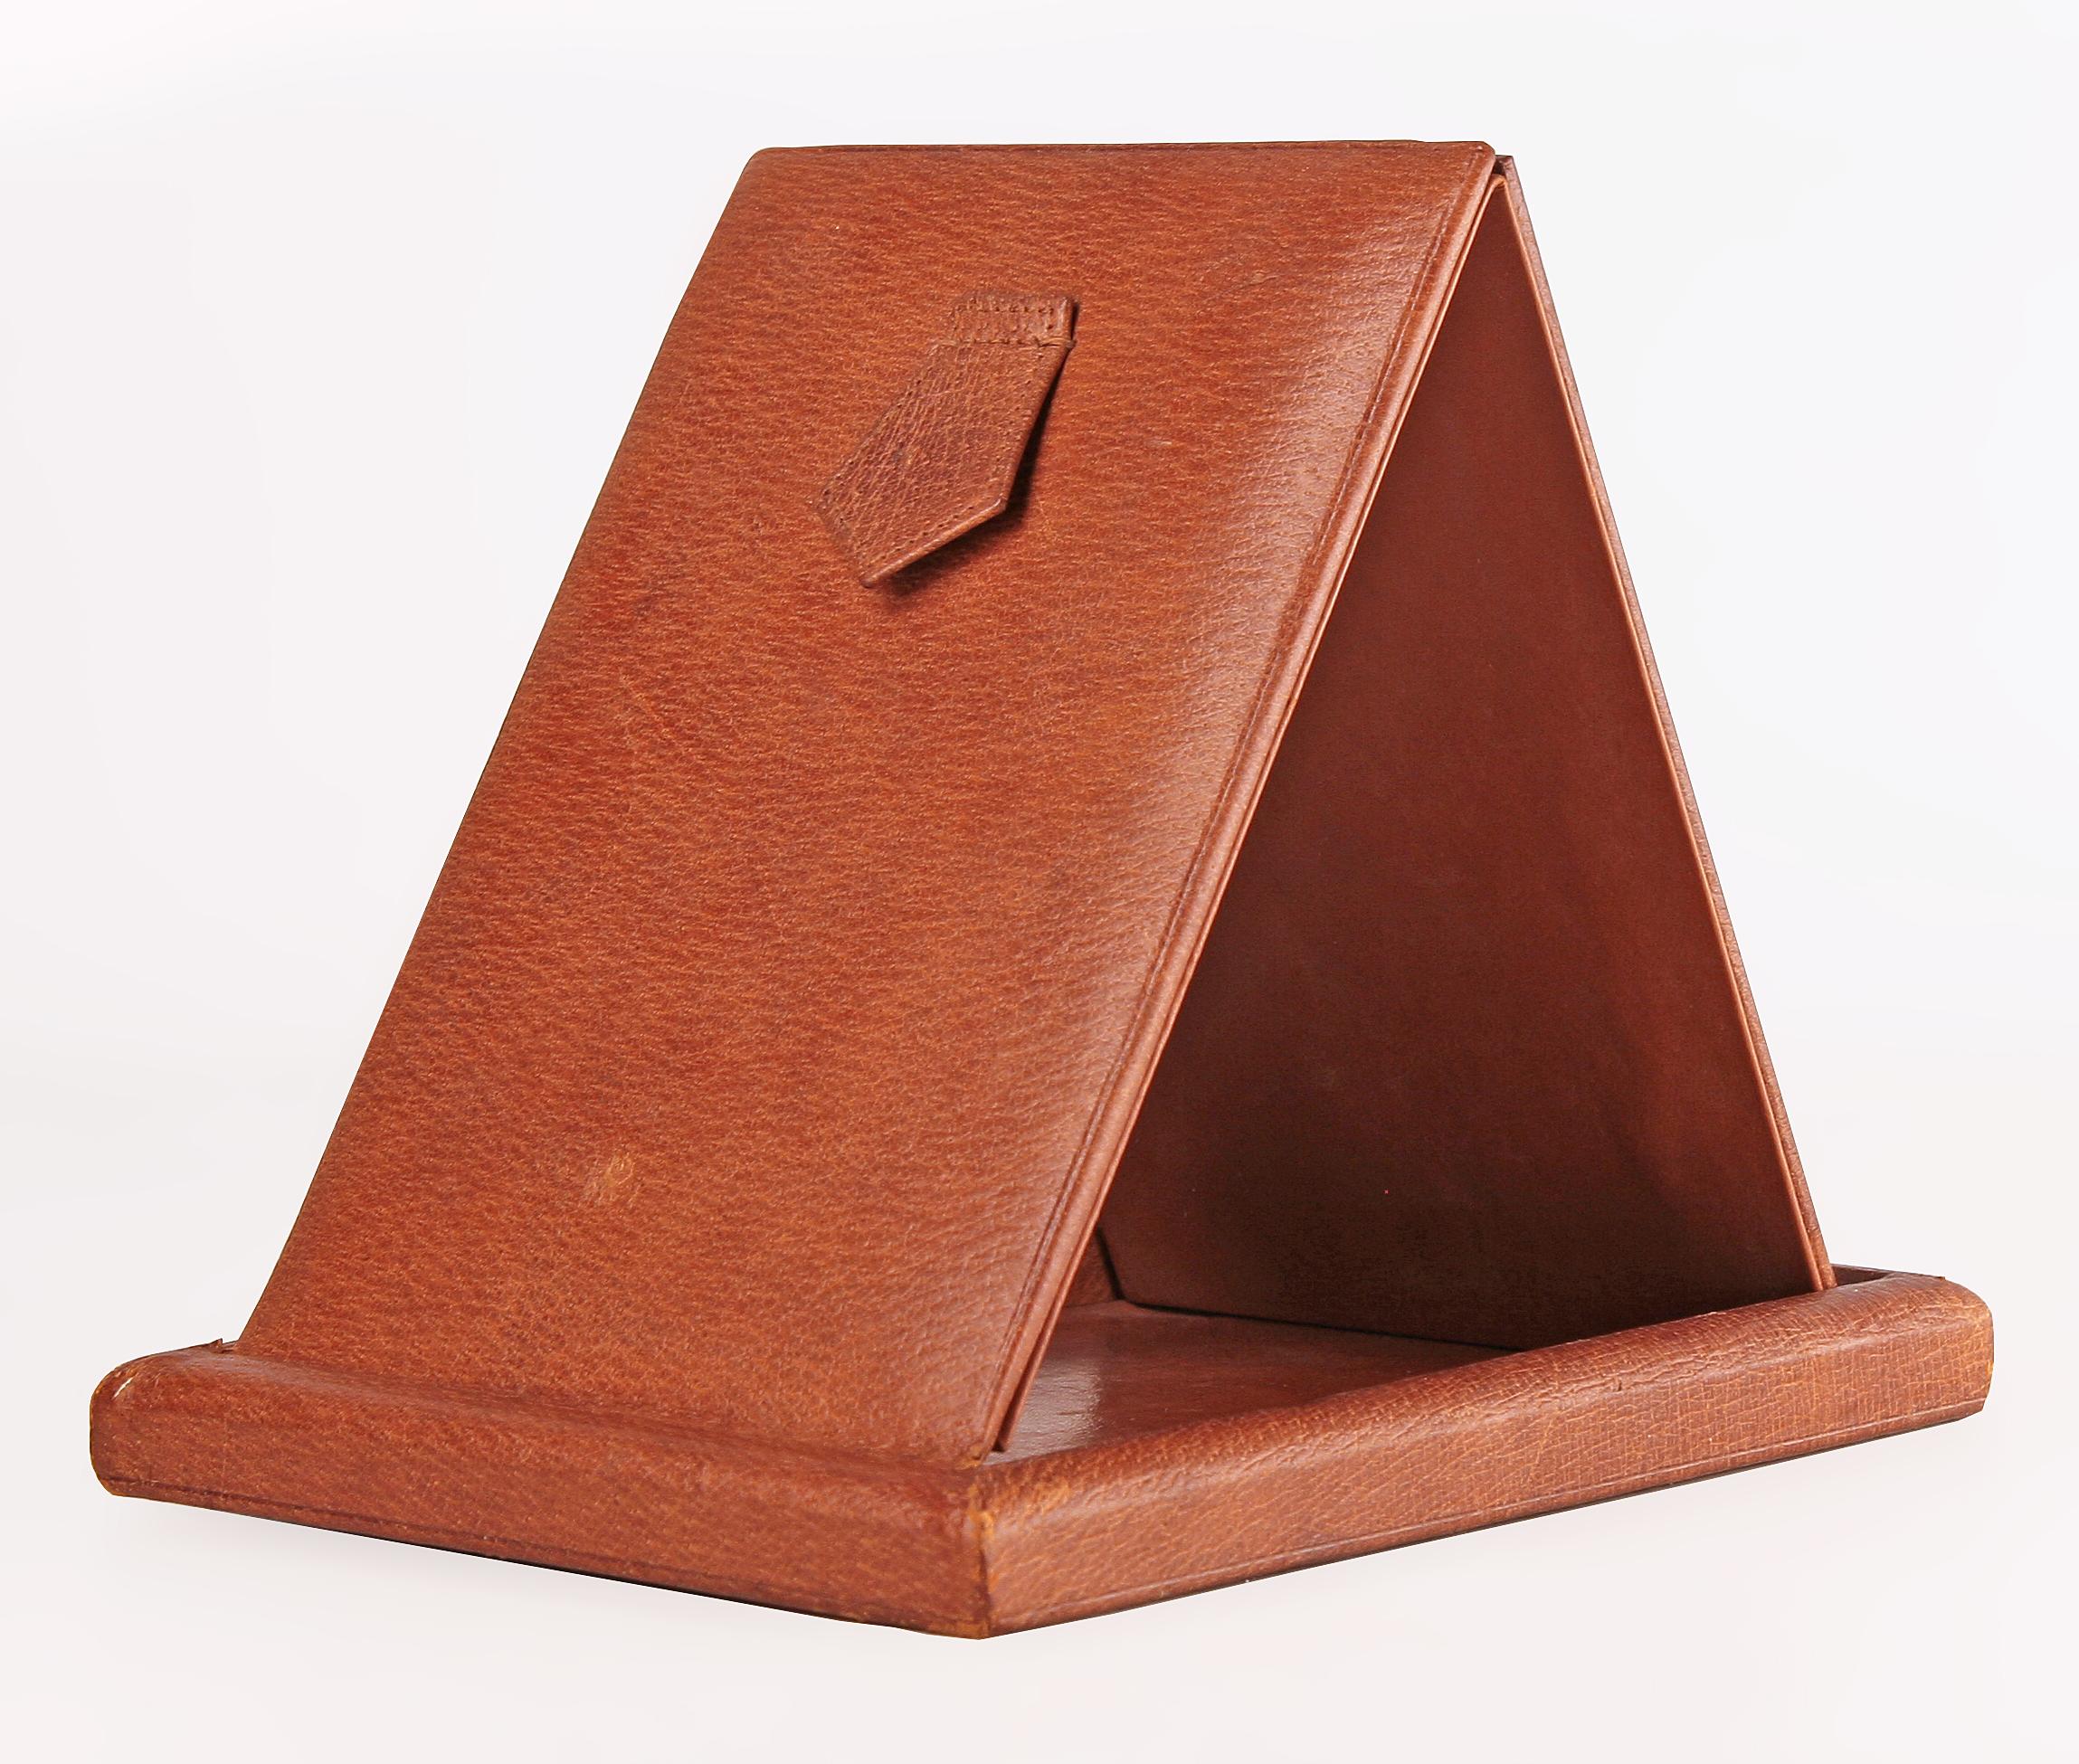 Post-Modern 20th C. Leather and Wood Foldable Beveled Mirror by French Brand Hermès Paris